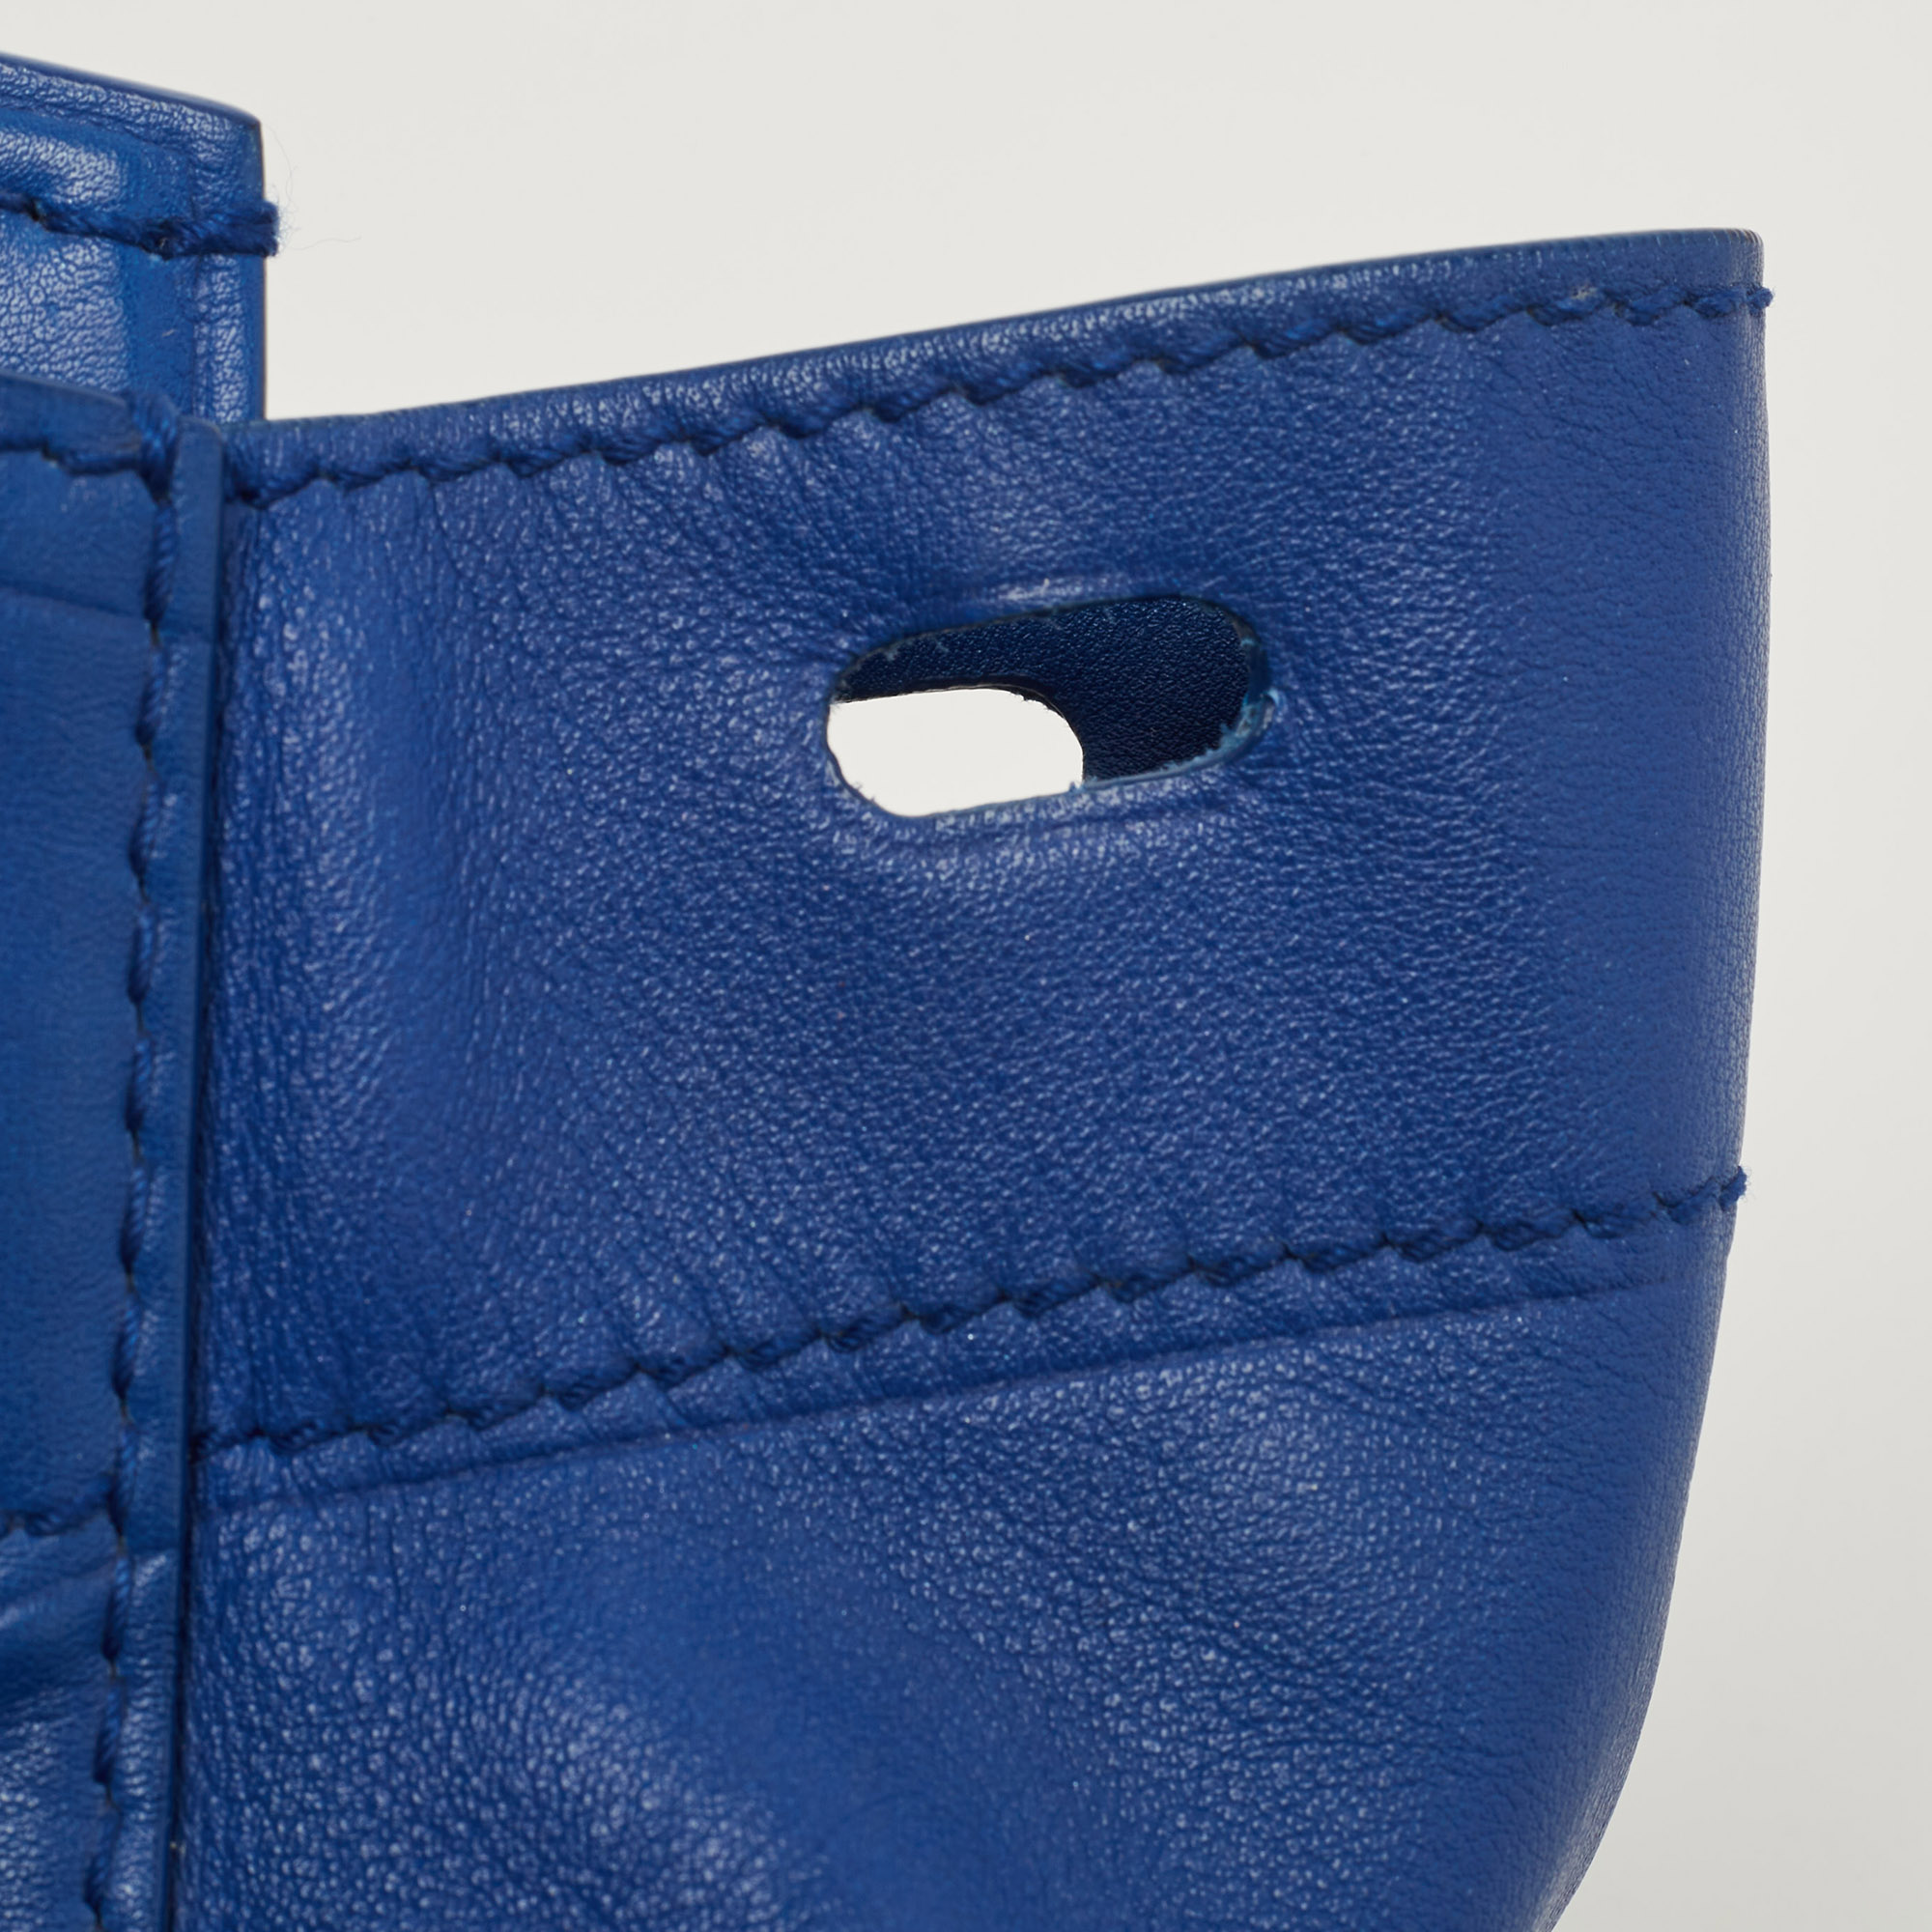 Ralph Lauren Blue Leather Soft Ricky Tote